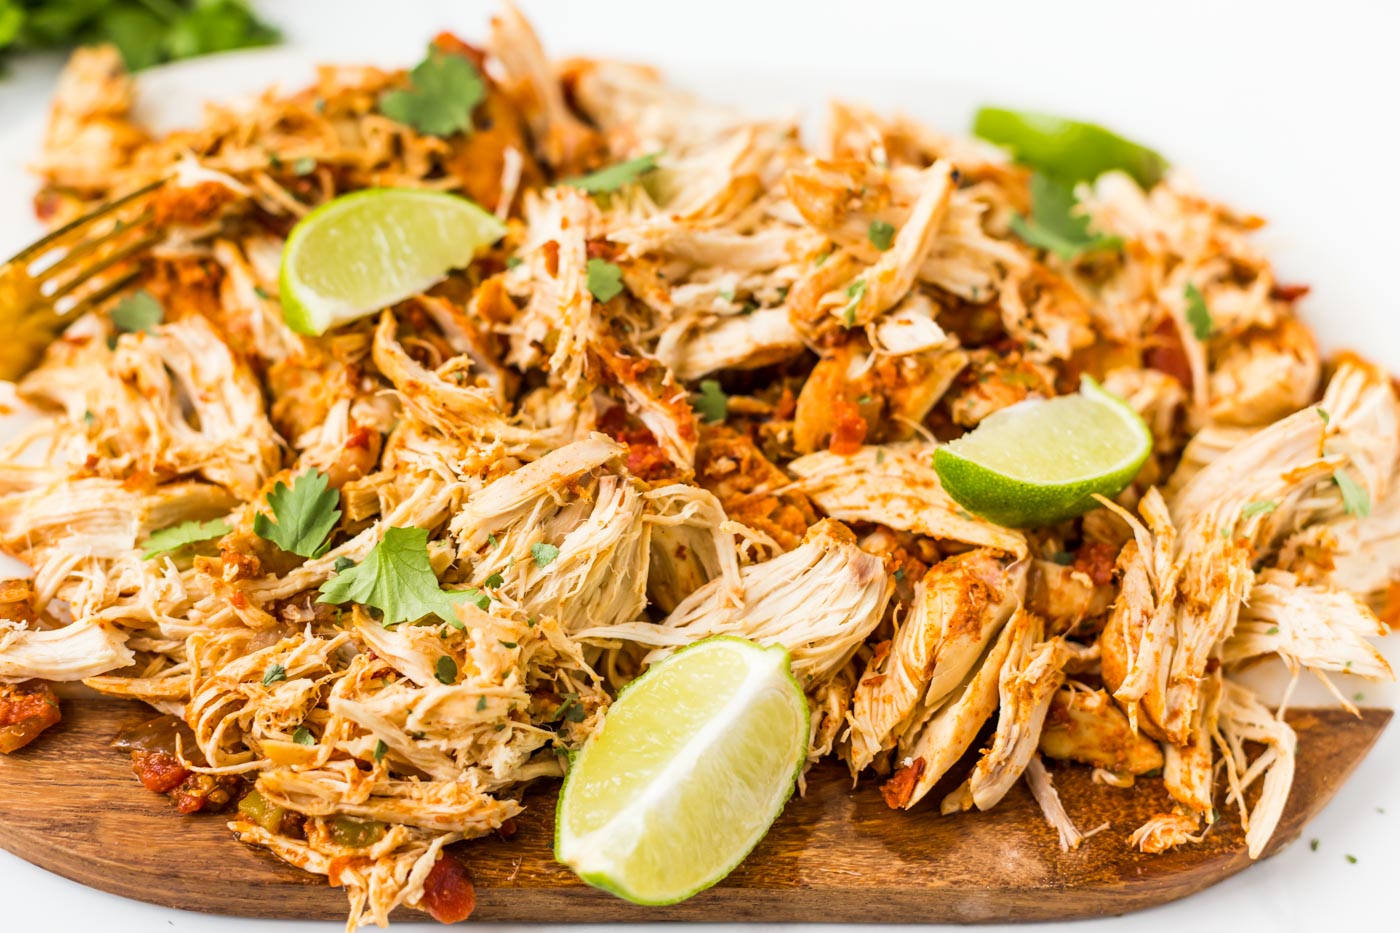 Shredded mexican chicken garnished with cilantro and sliced limes on cutting board